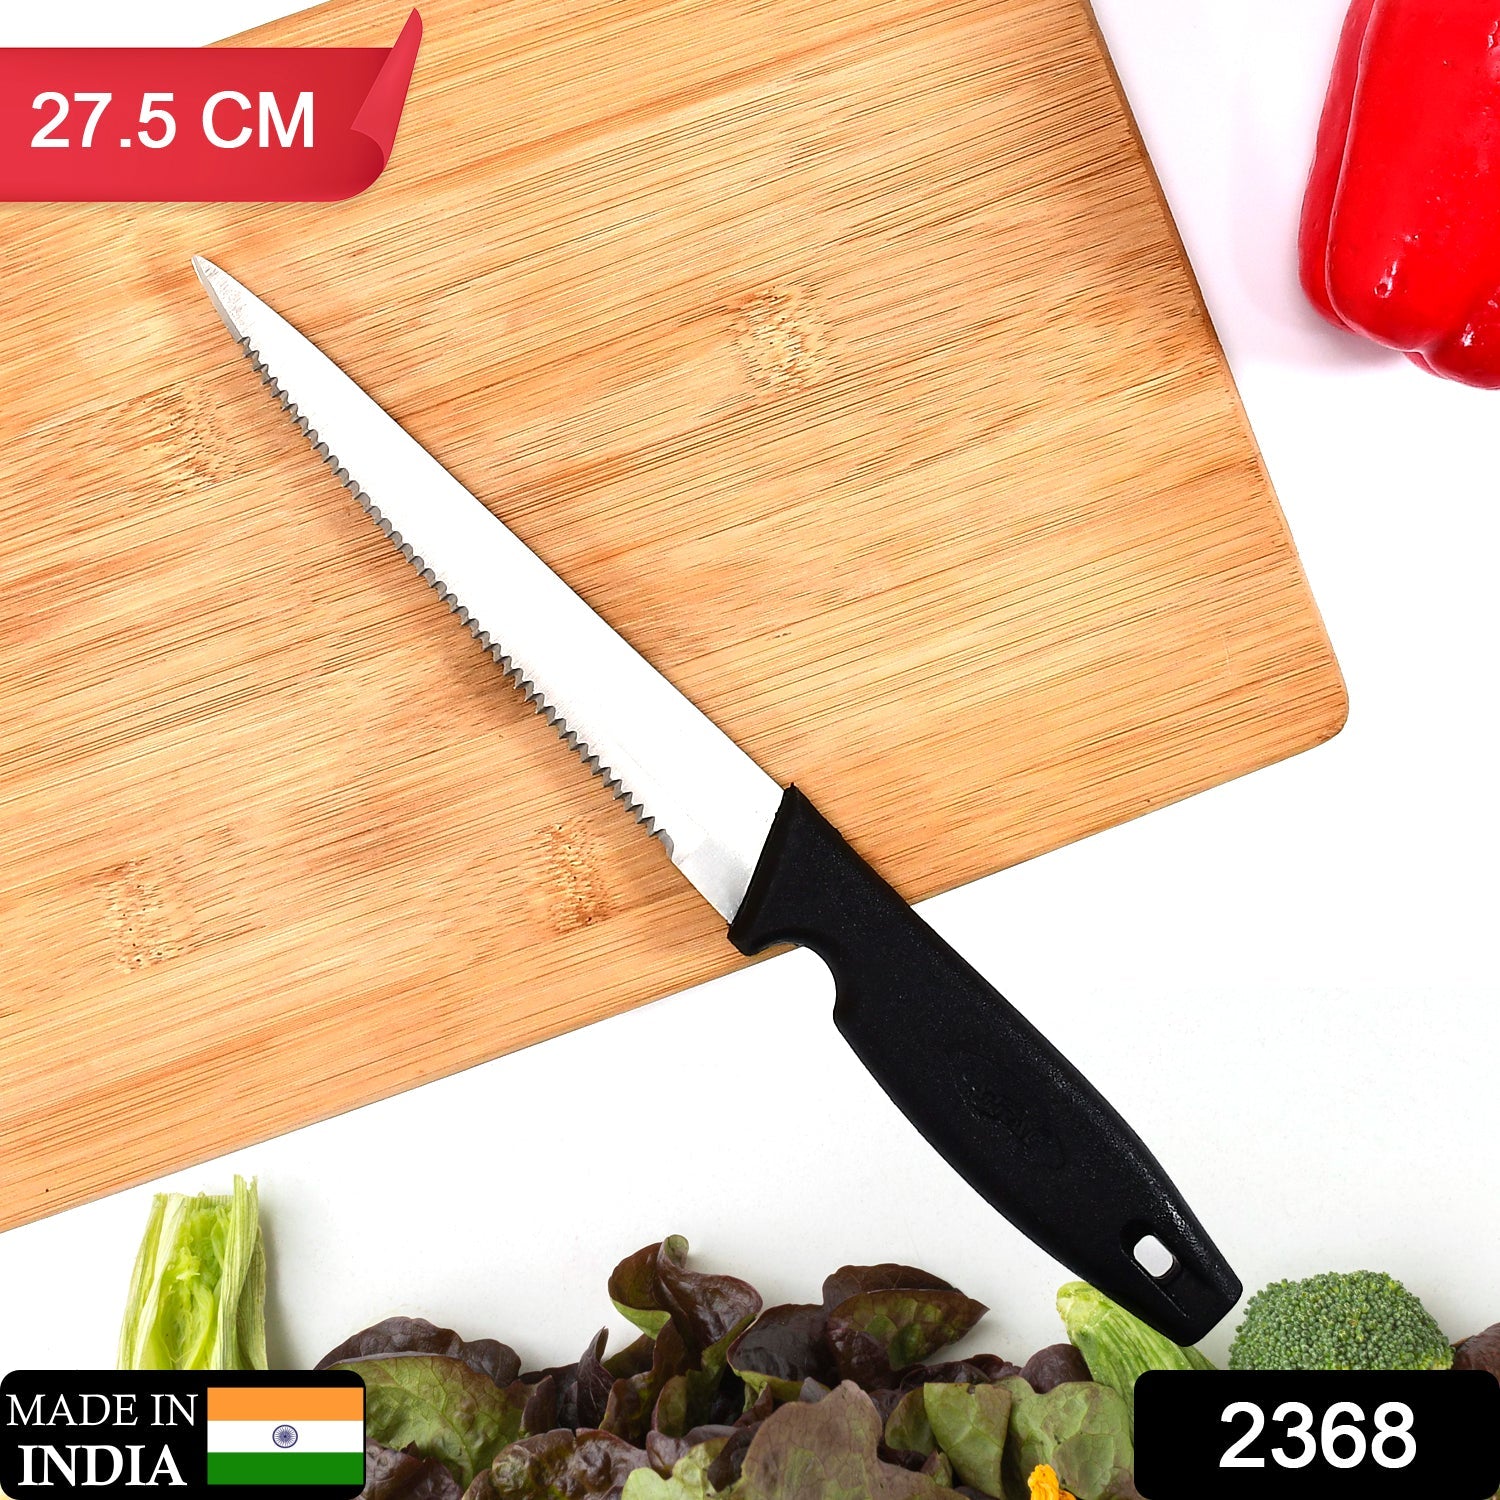 2368 Stainless Steel knife and Kitchen Knife with Black Grip Handle (27.5 Cm ) DeoDap